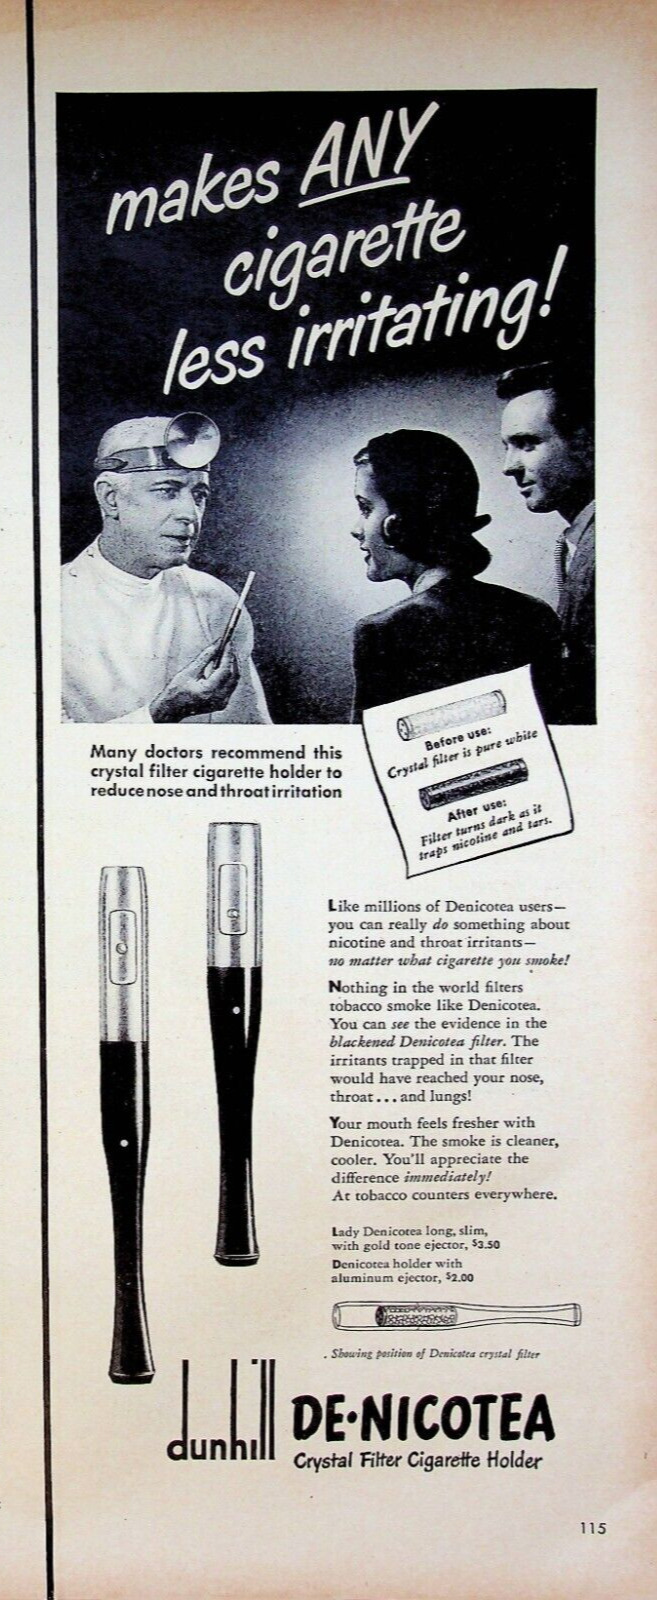 1949 Dunhill Crystal Filter Cigarette Holder Print Ad 1940s Doctor Recommended